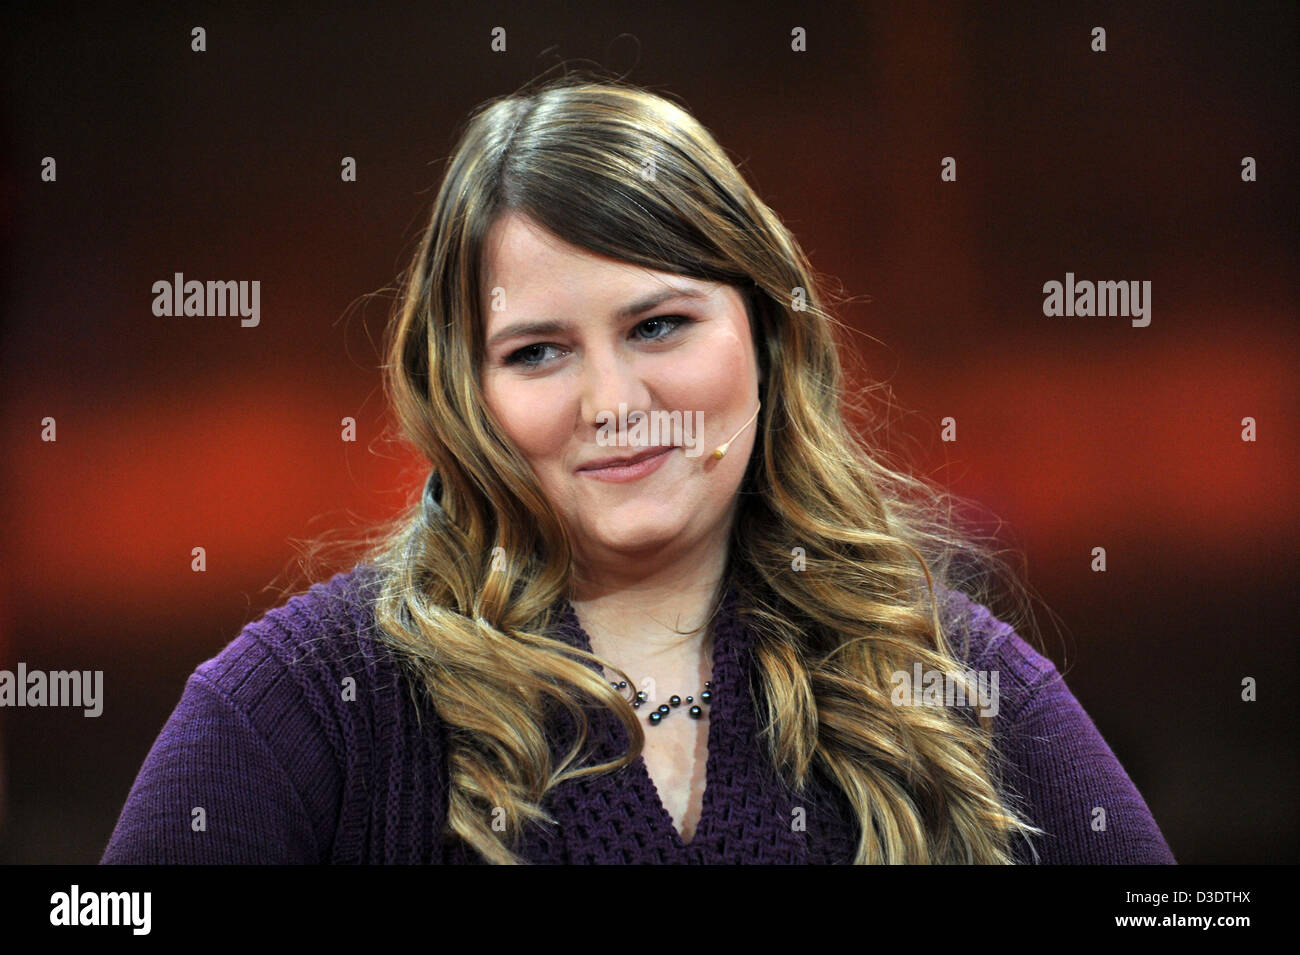 Kidnap victim Natascha Kampusch appears in the ARD television talk show 'Guenther Jauch' at Gasometer in Berlin, Germany, 17 February 2013. This week's topic is 'Kidnapped  and abused - How successful is life afterwards?'. Photo: PAUL ZINKEN Stock Photo